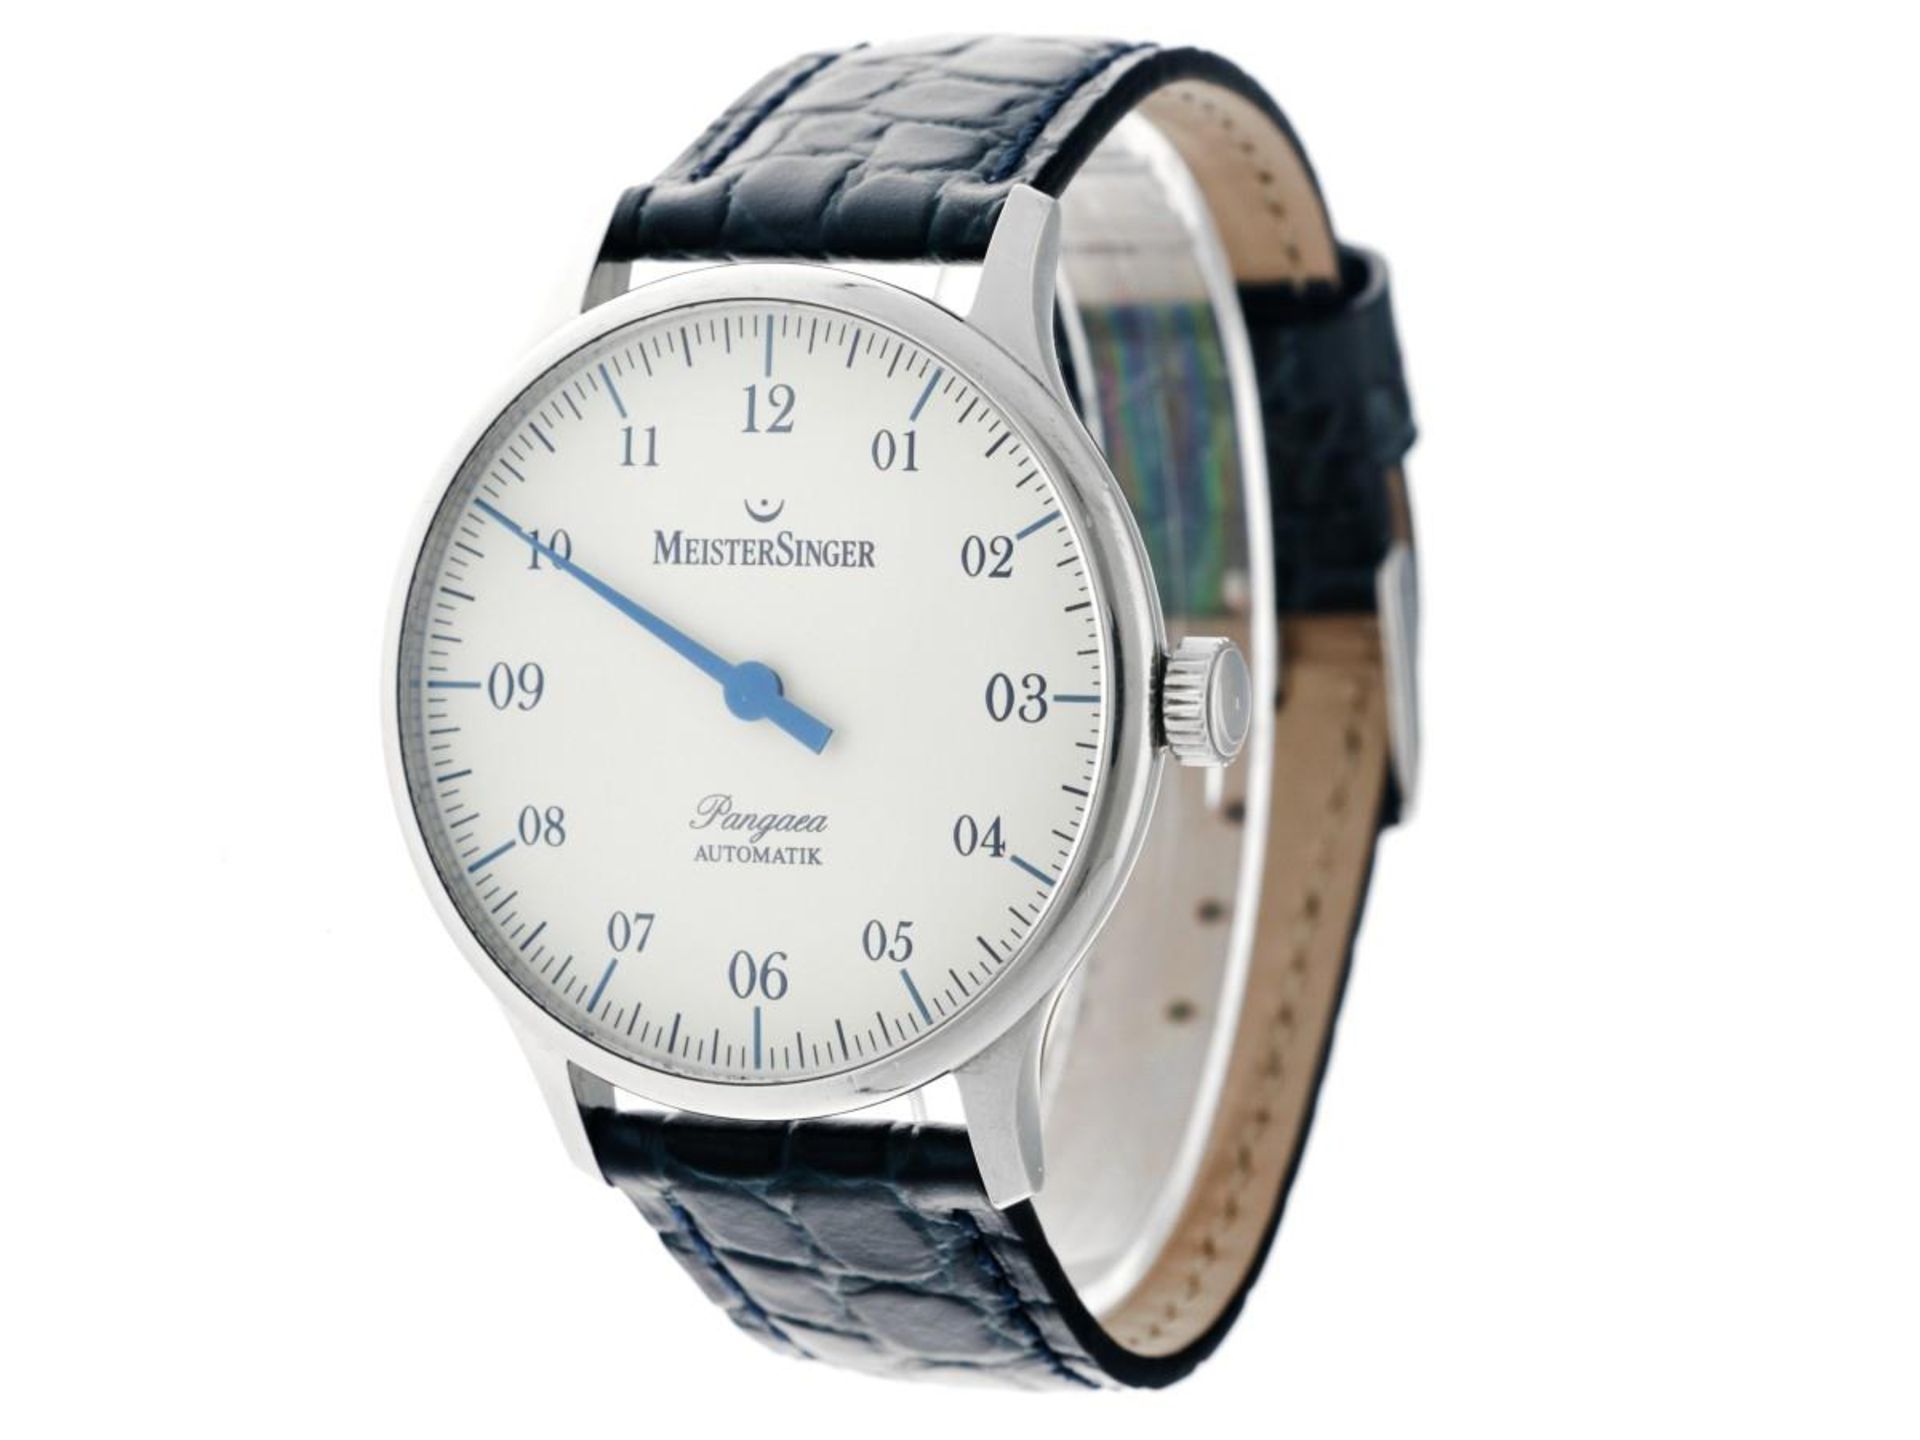 Meistersinger Pangaea PM903 - Men's watch - approx. 2014. - Image 2 of 6